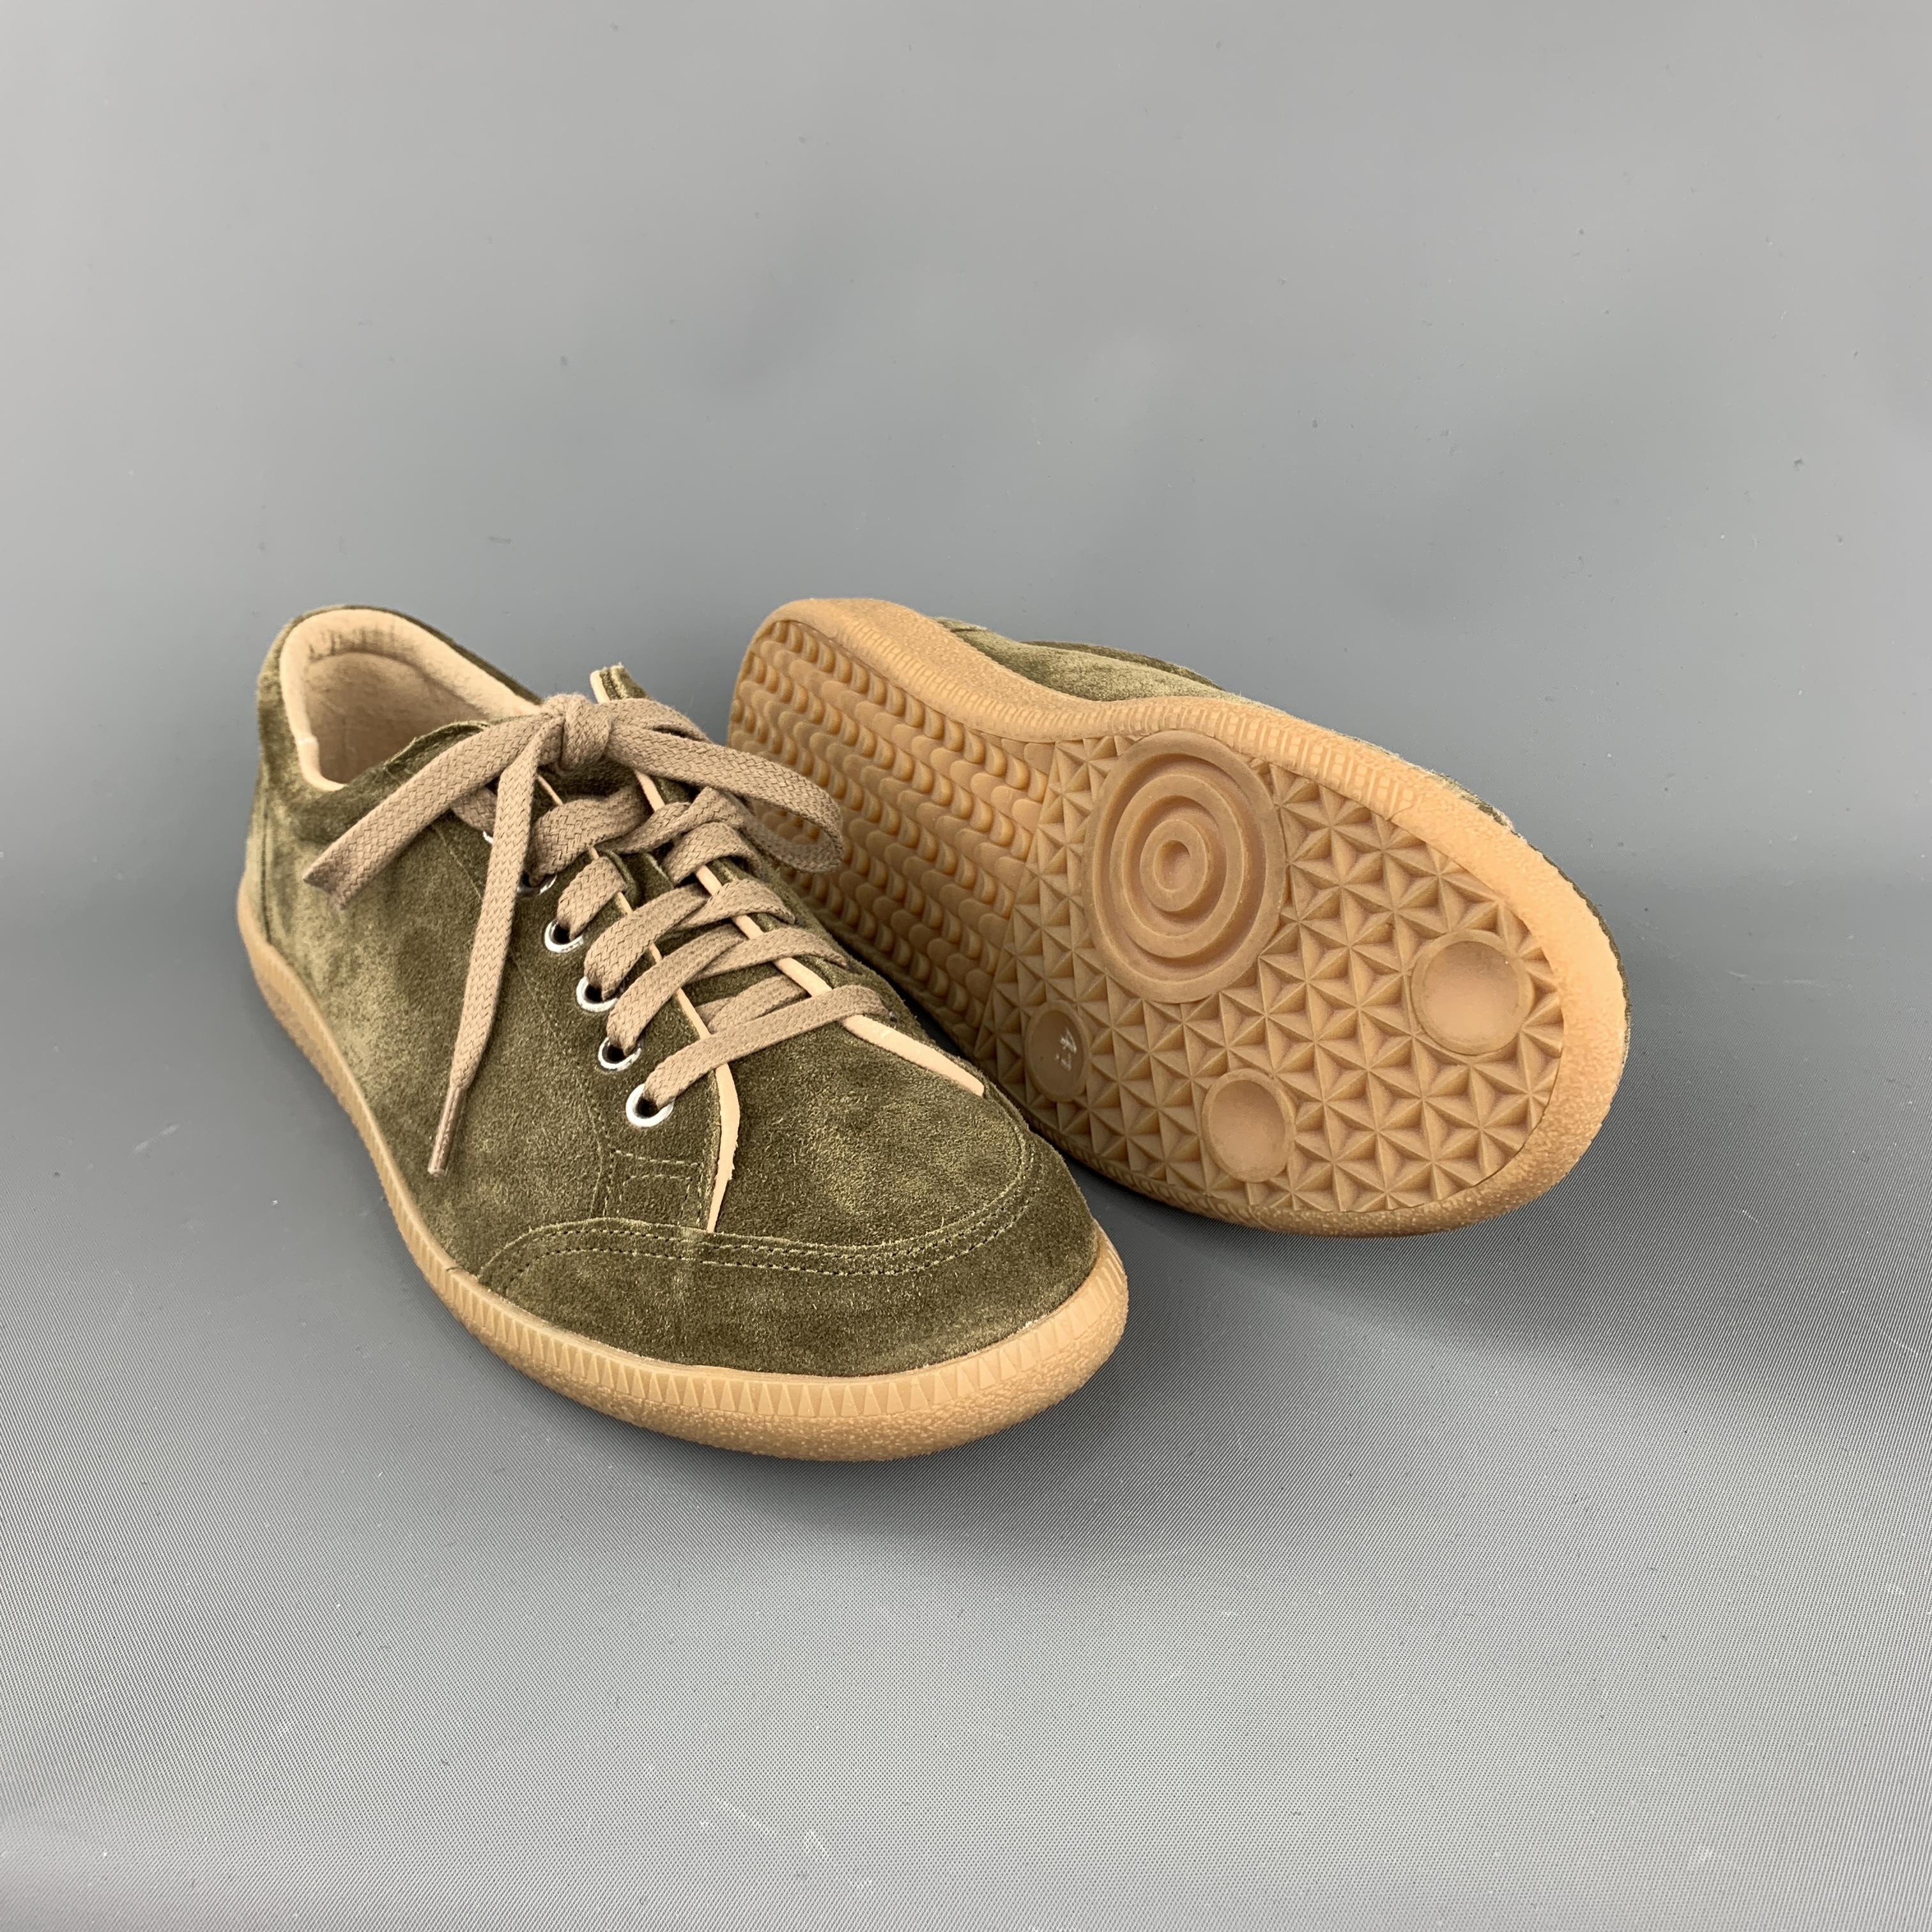 BORRELLI sneaker comes in a olive suede featuring a lace up style and rubber sole. Made in Italy.
 
Excellent Pre-Owned Condition.
Marked: 41
 
Outsole: 11.25 in. x 4 in.